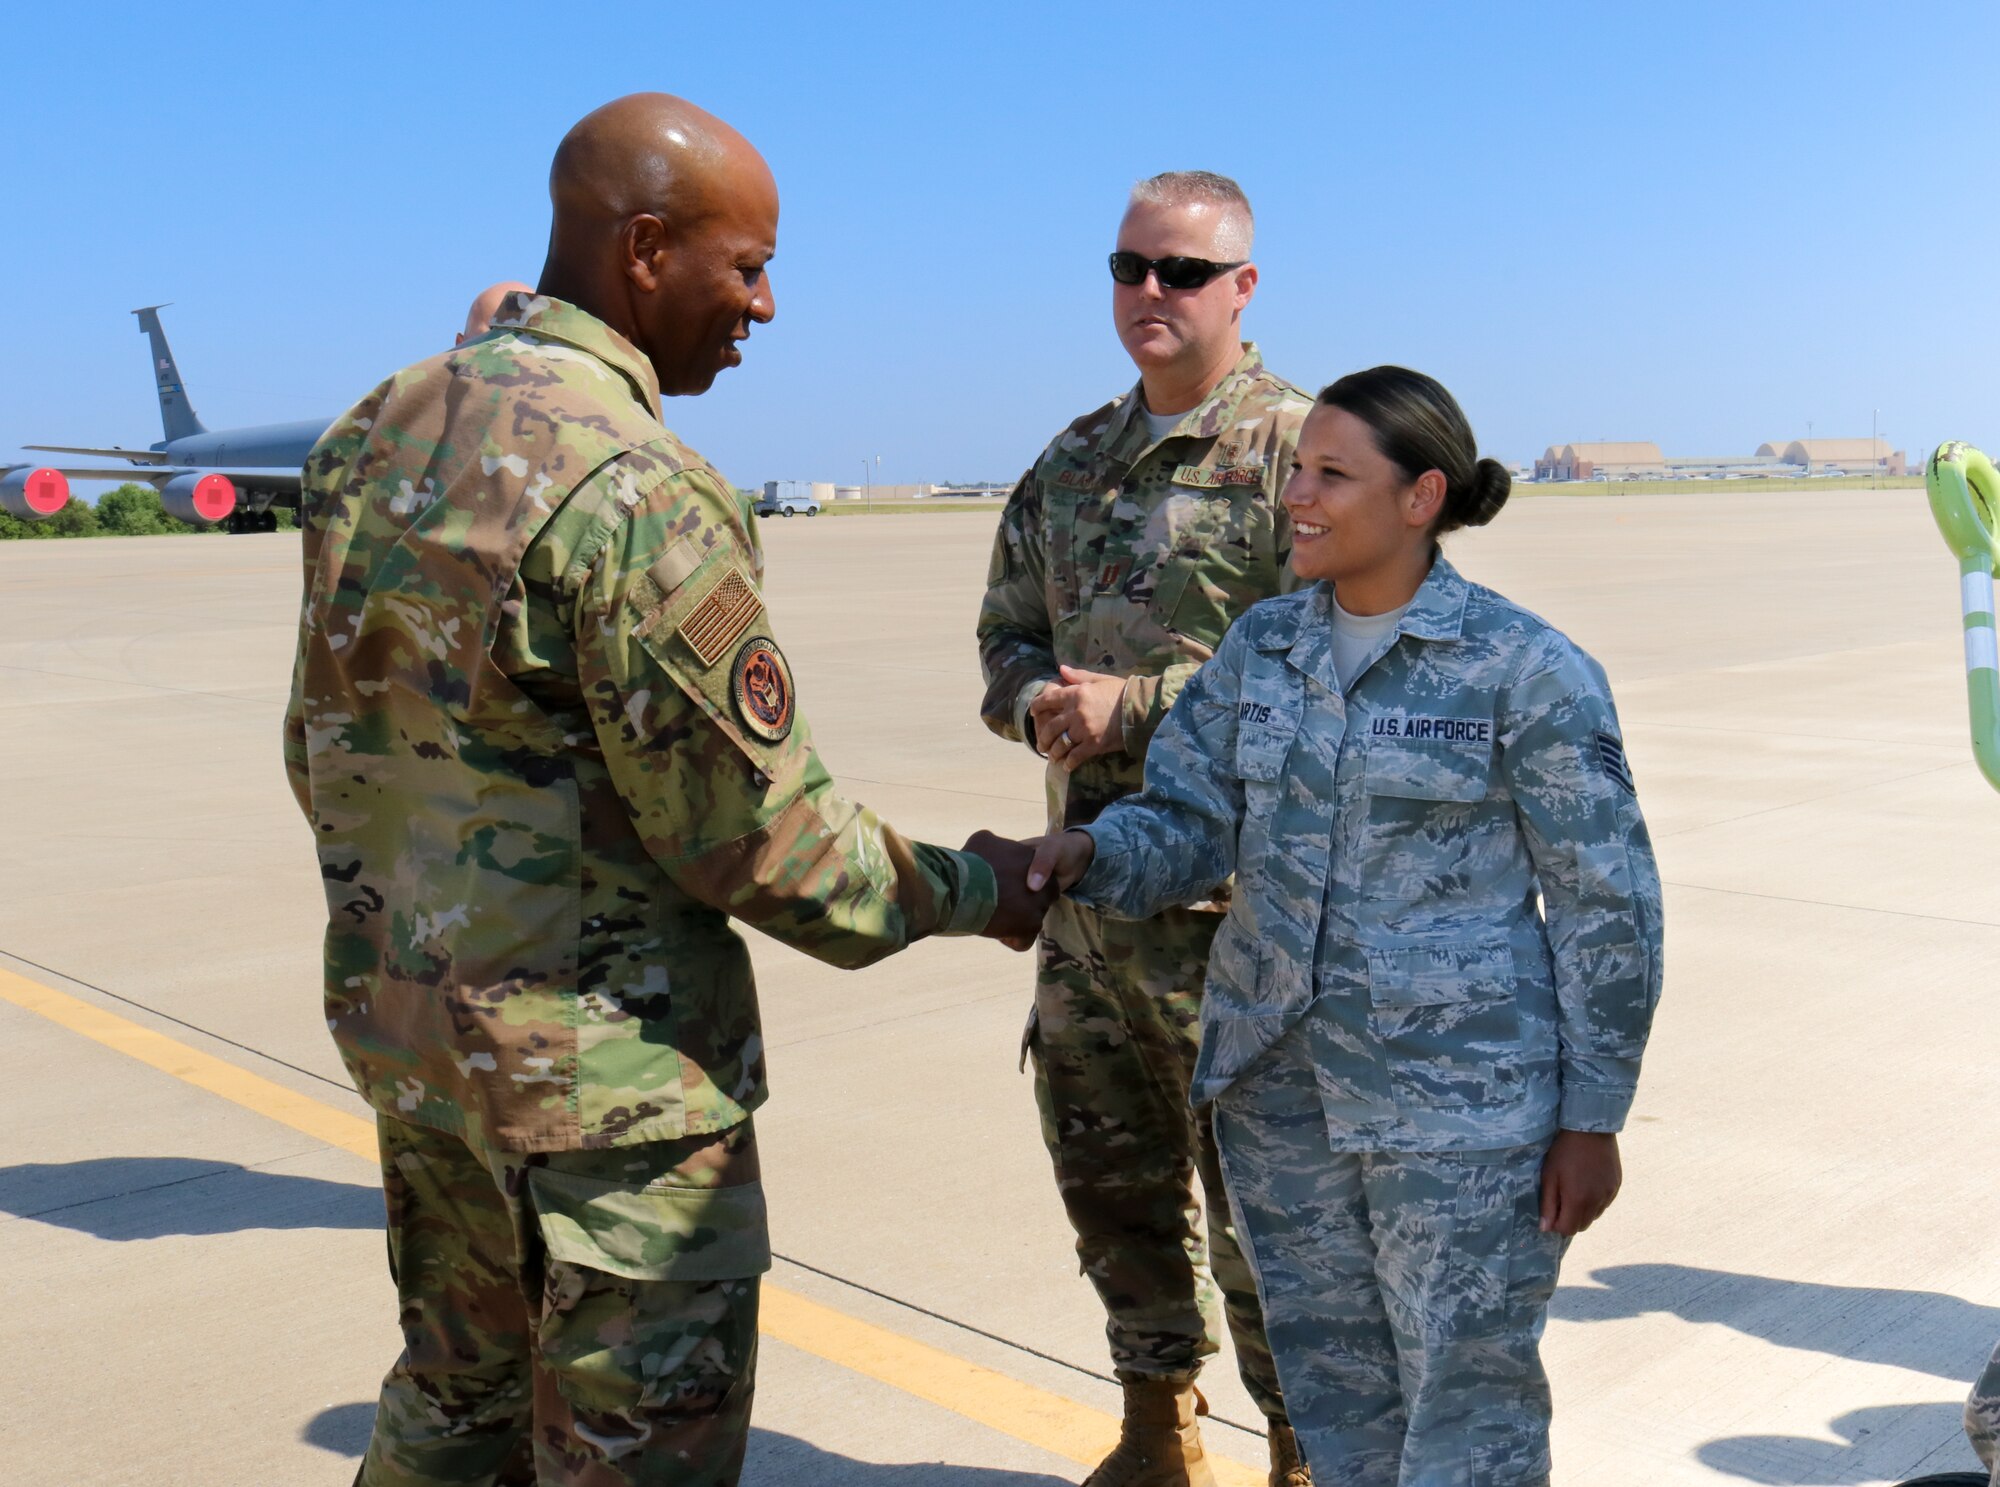 Chief Master Sgt. of the Air Force Kaleth O. Wright coins Staff Sgt. Amber Artis a medical technician for her outstanding performance during his visit to the 507th Air Refueling Wing, Tinker Air Force Base, Oklahoma, July 31, 2019. (U.S. Air Force photo by Senior Airman Mary Begy